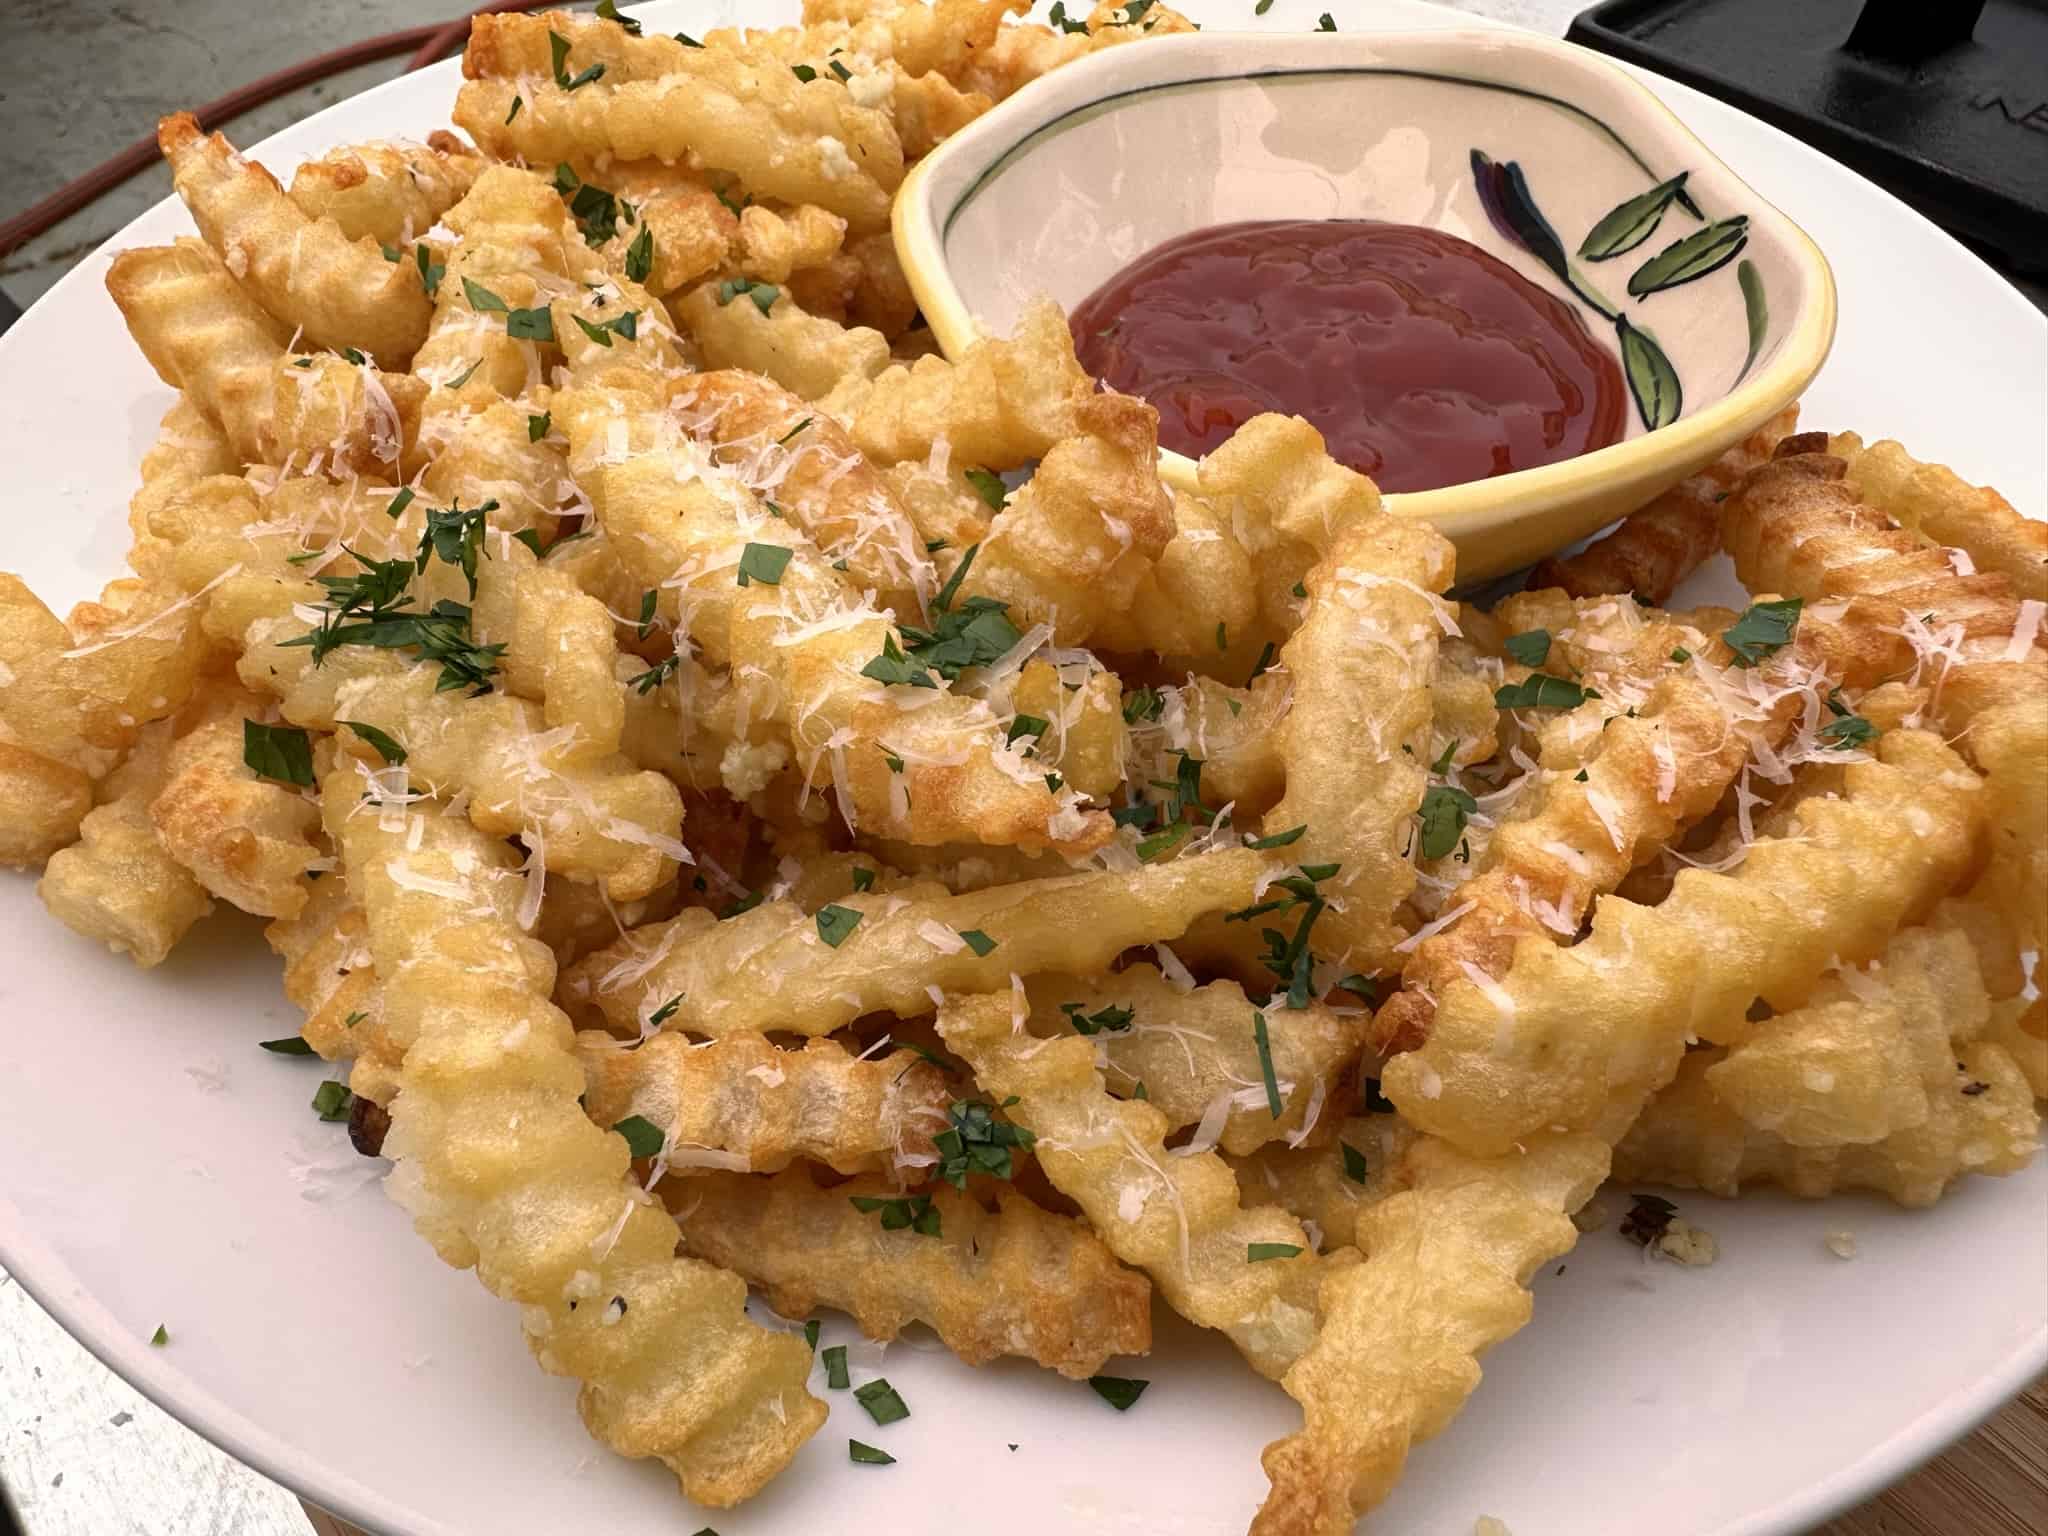 Garlic parmesan fries on a plate with a small dish of ketchup.